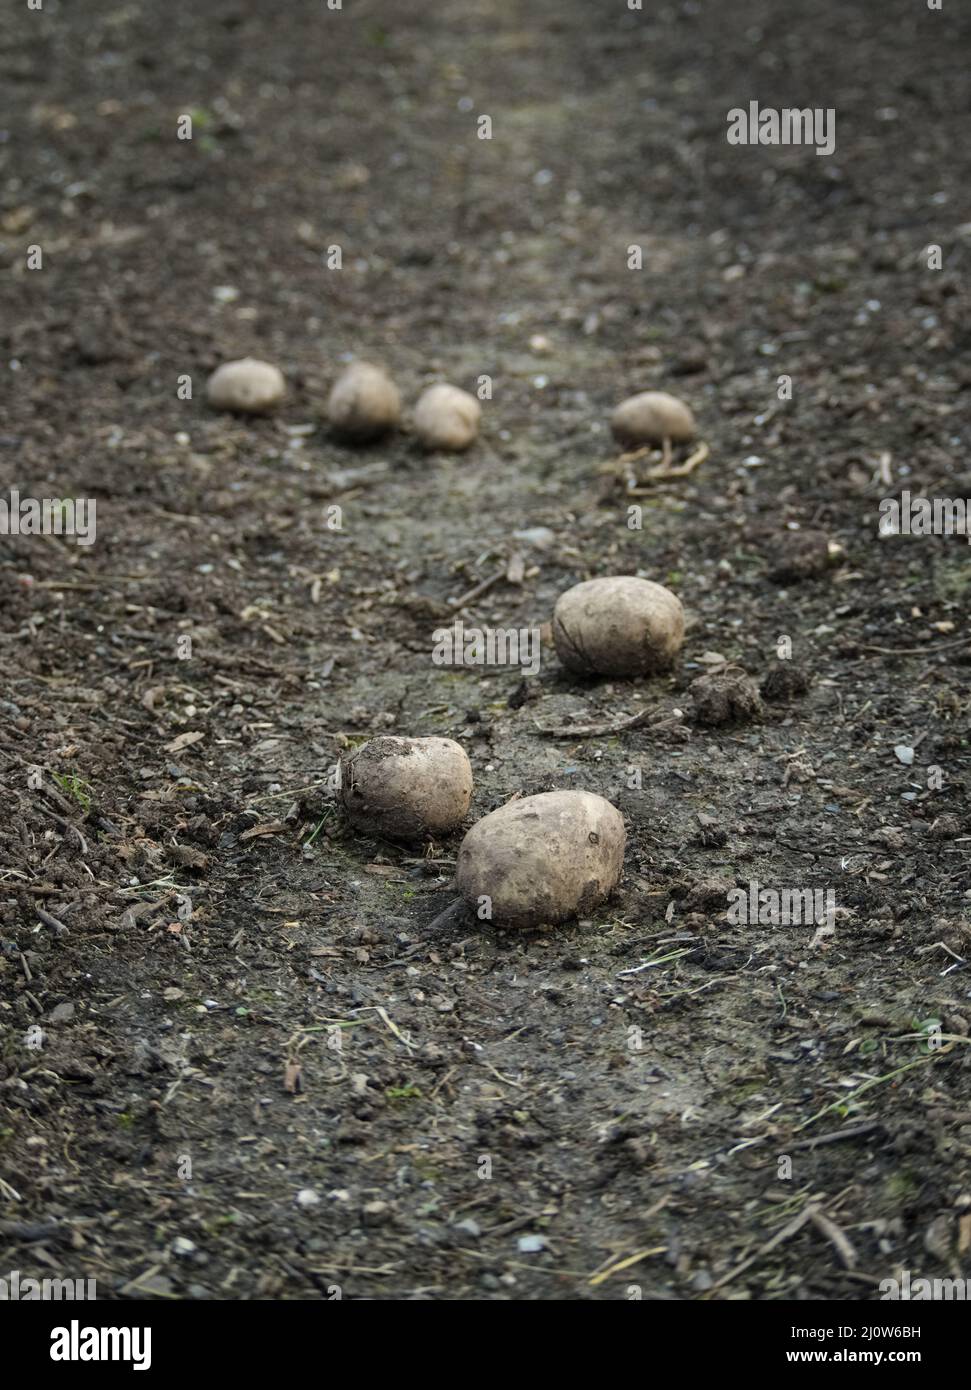 Newly harvested potatoes lying on the soil at a 'no-dig'/'no-till' community supported agriculture (CSA) farm in Cornwall, UK Stock Photo